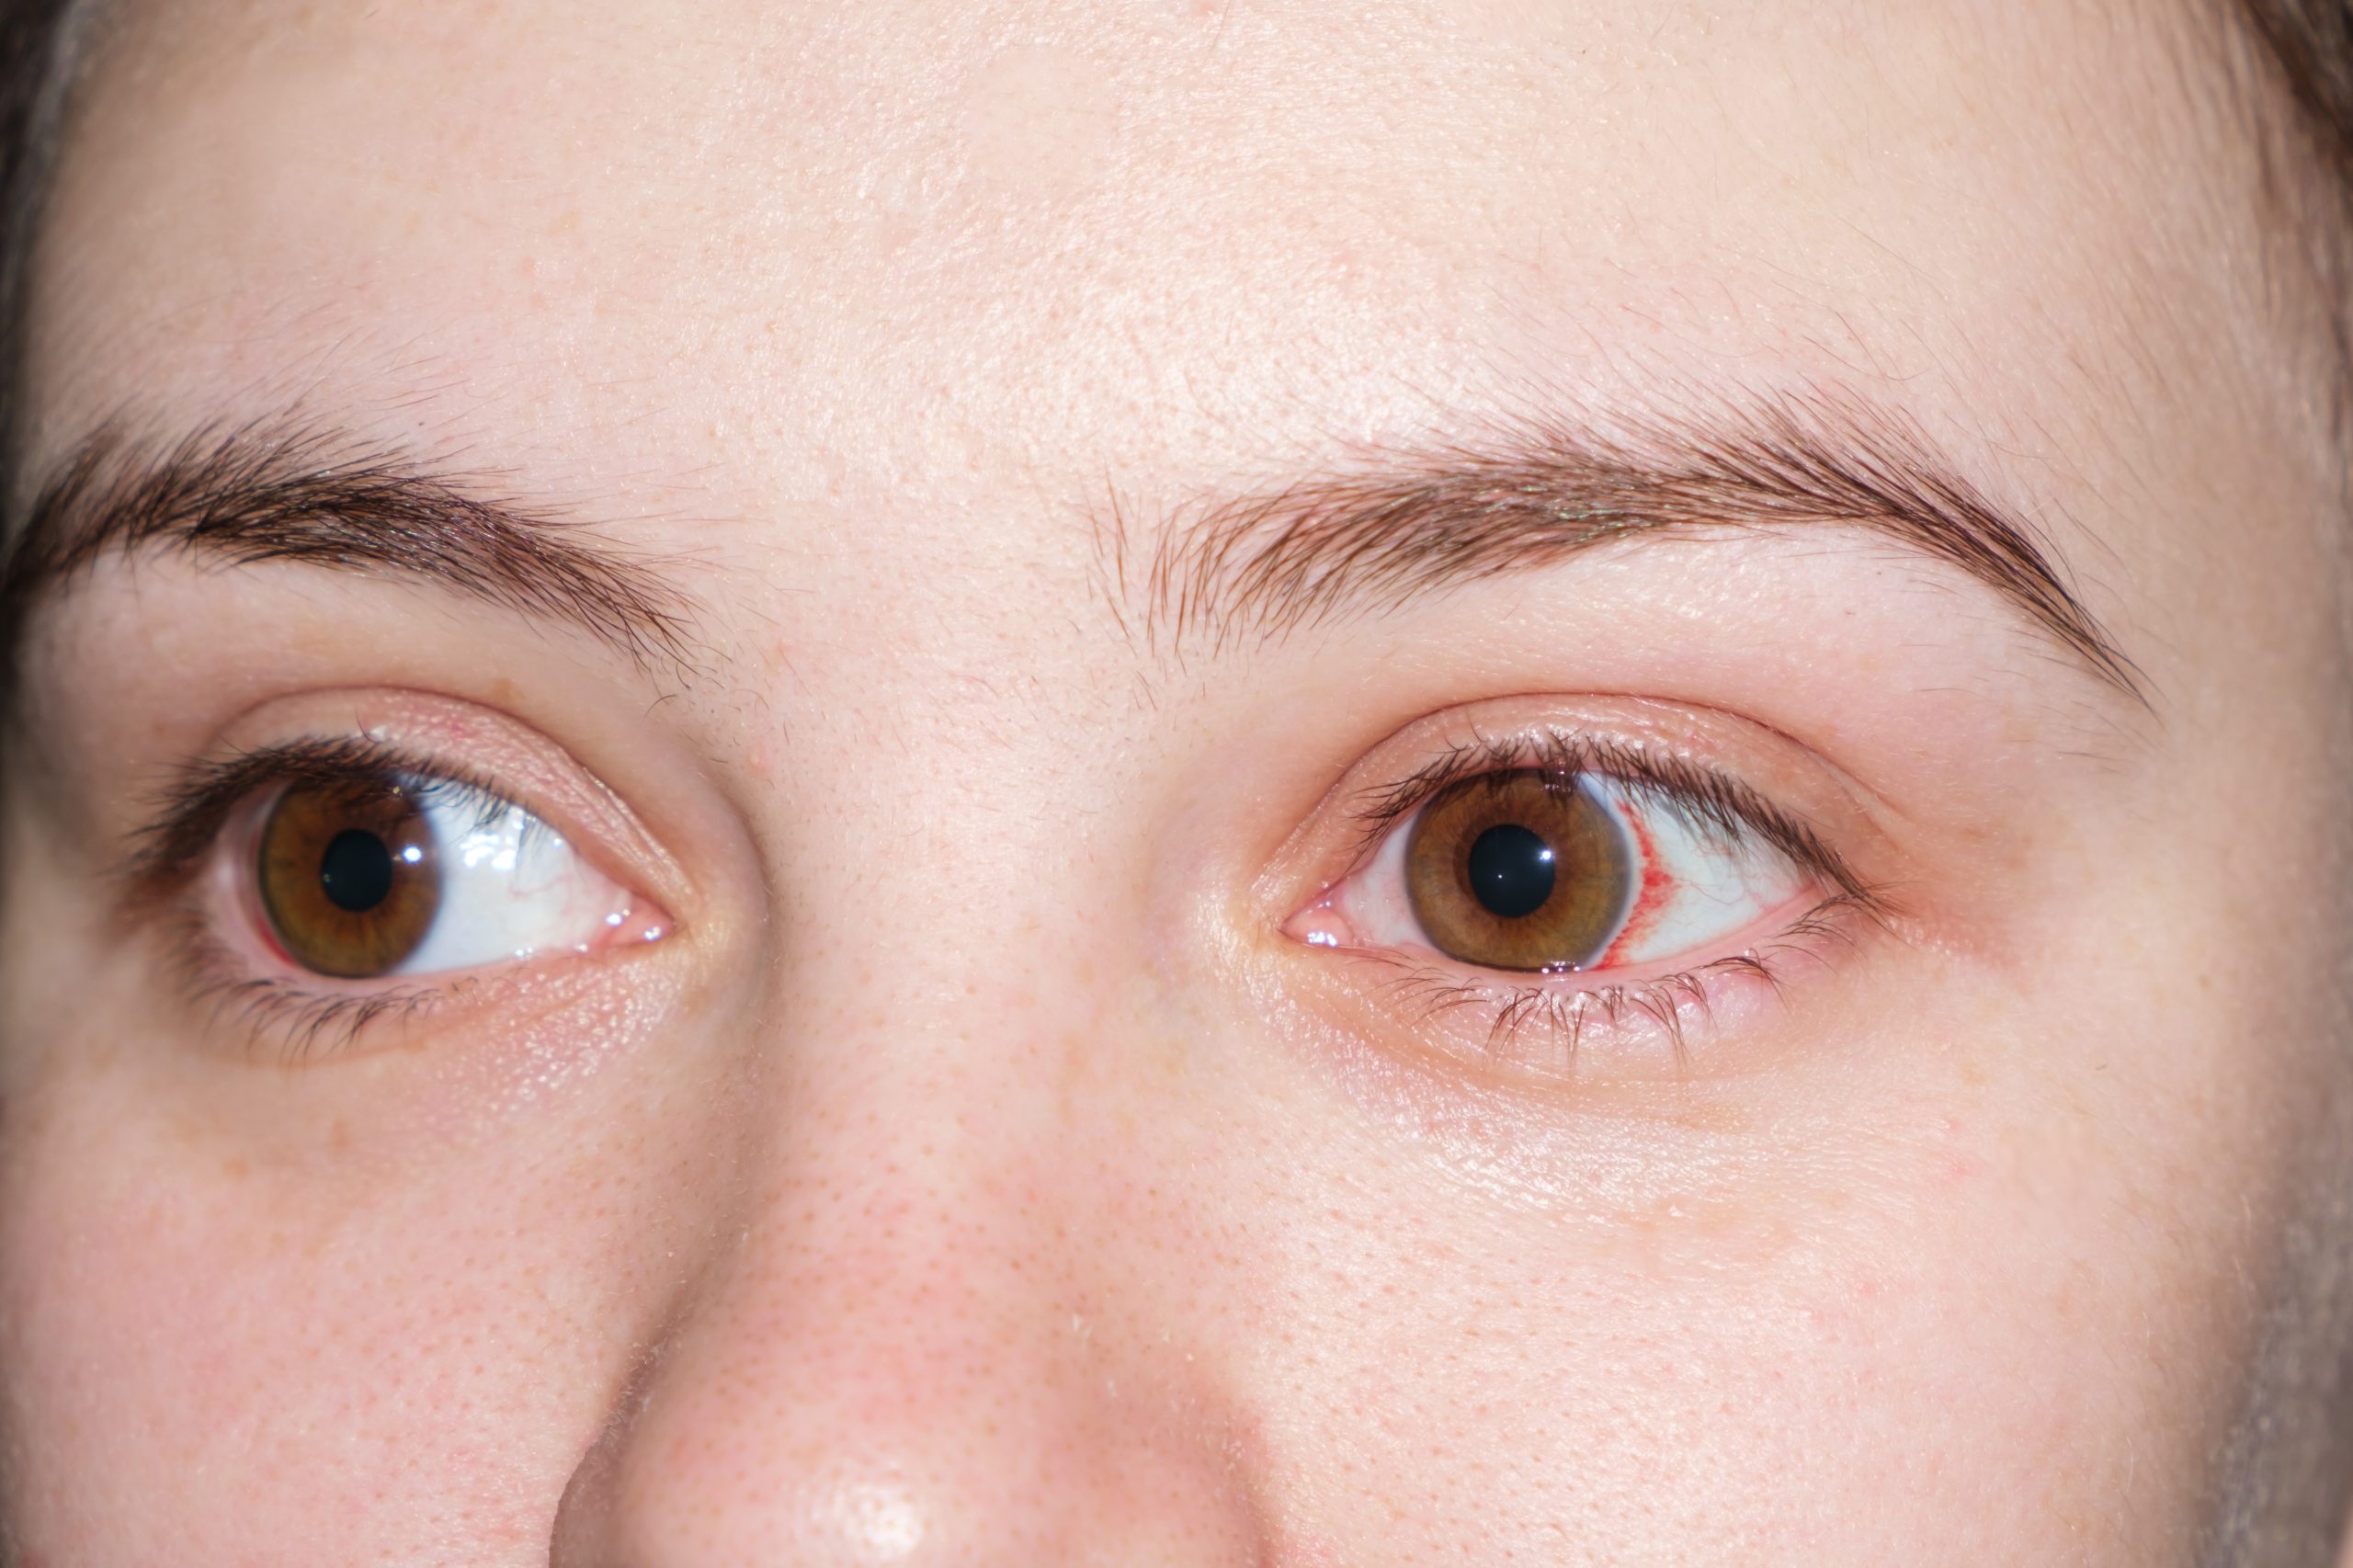 xerophthalmia Definition, Causes and Treatment